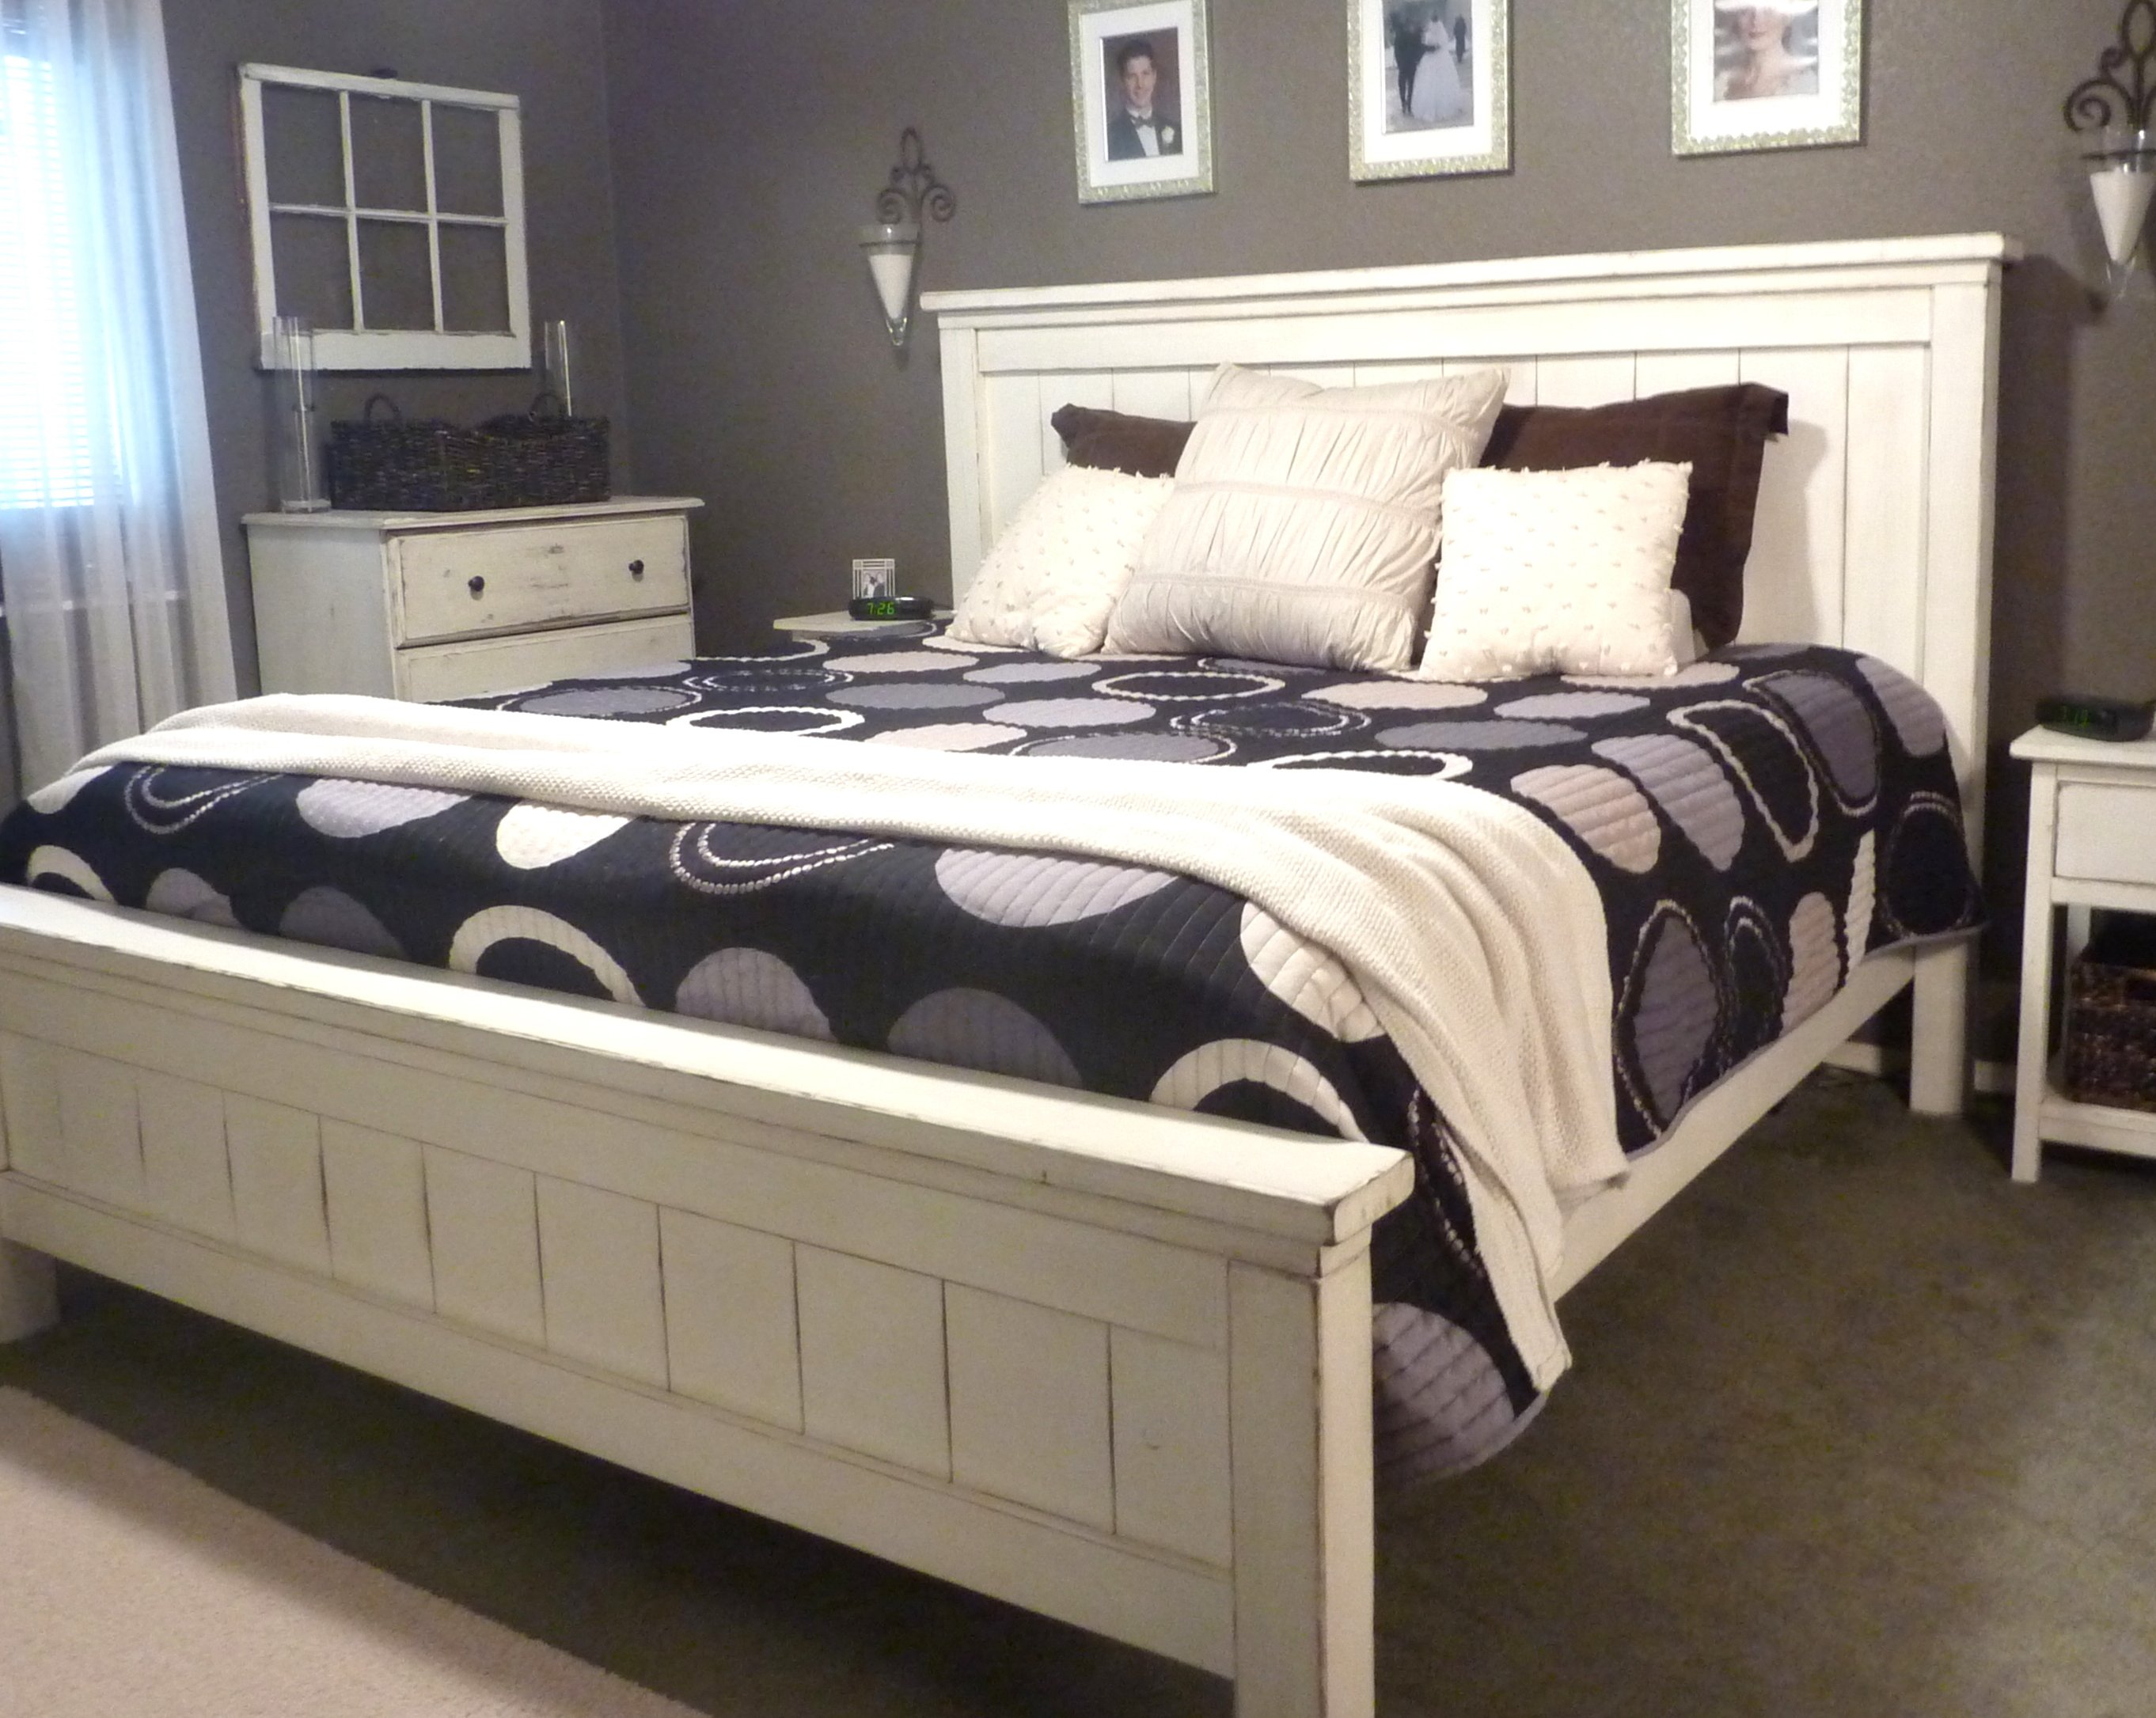 King Farmhouse Bed Do It Yourself Home Projects from Ana White